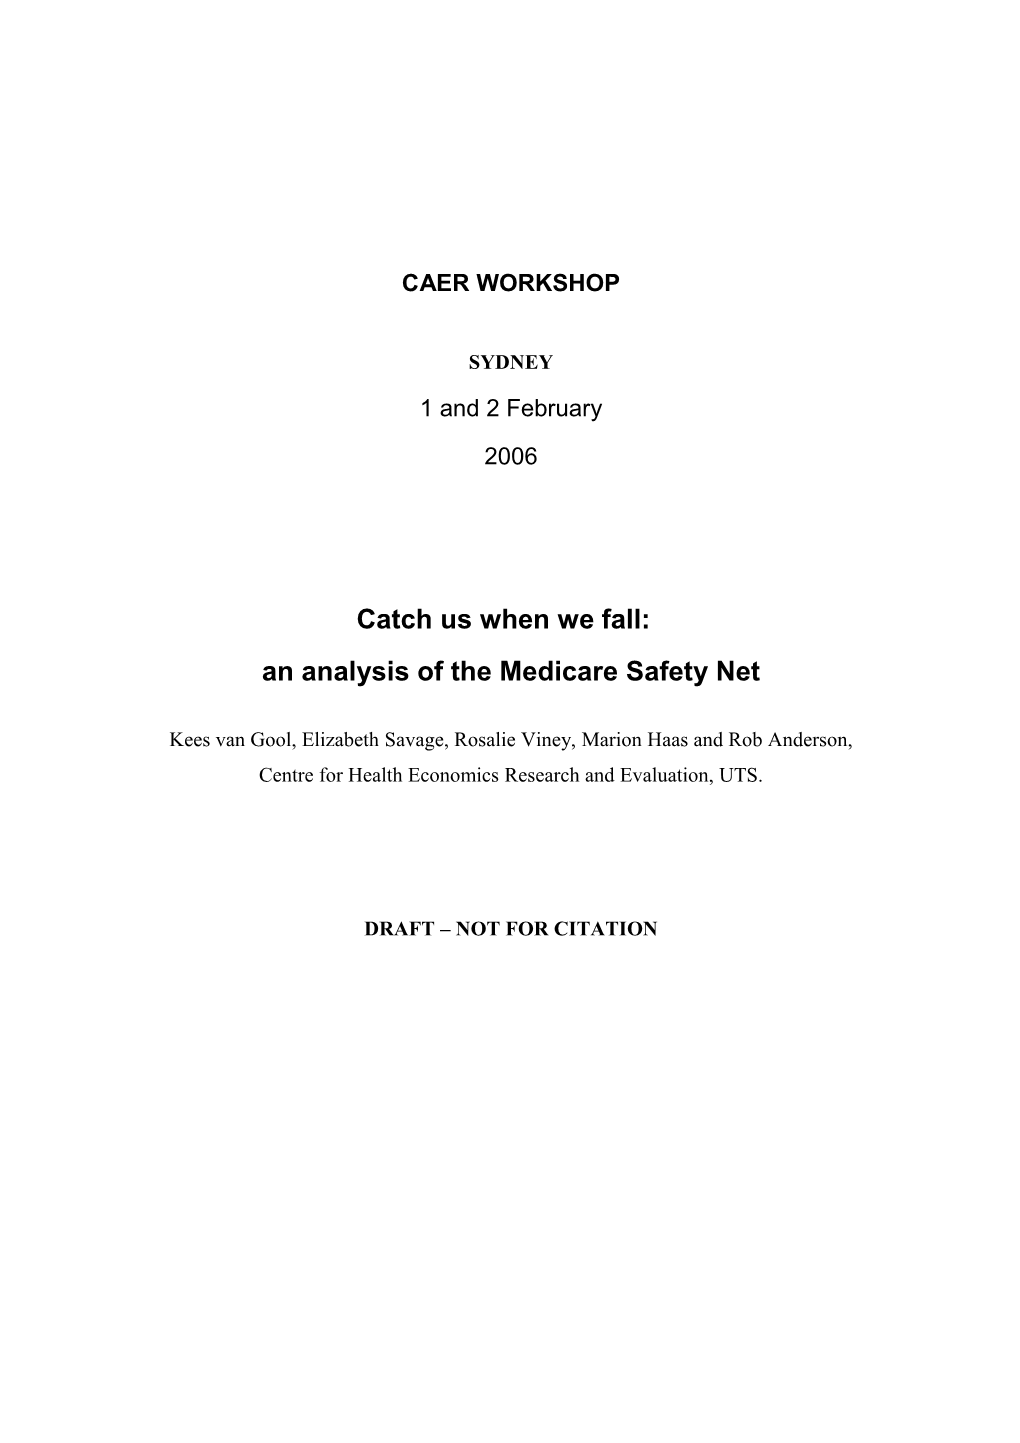 Catch Us When We Fall: an Analysis of the Medicare Safety Net